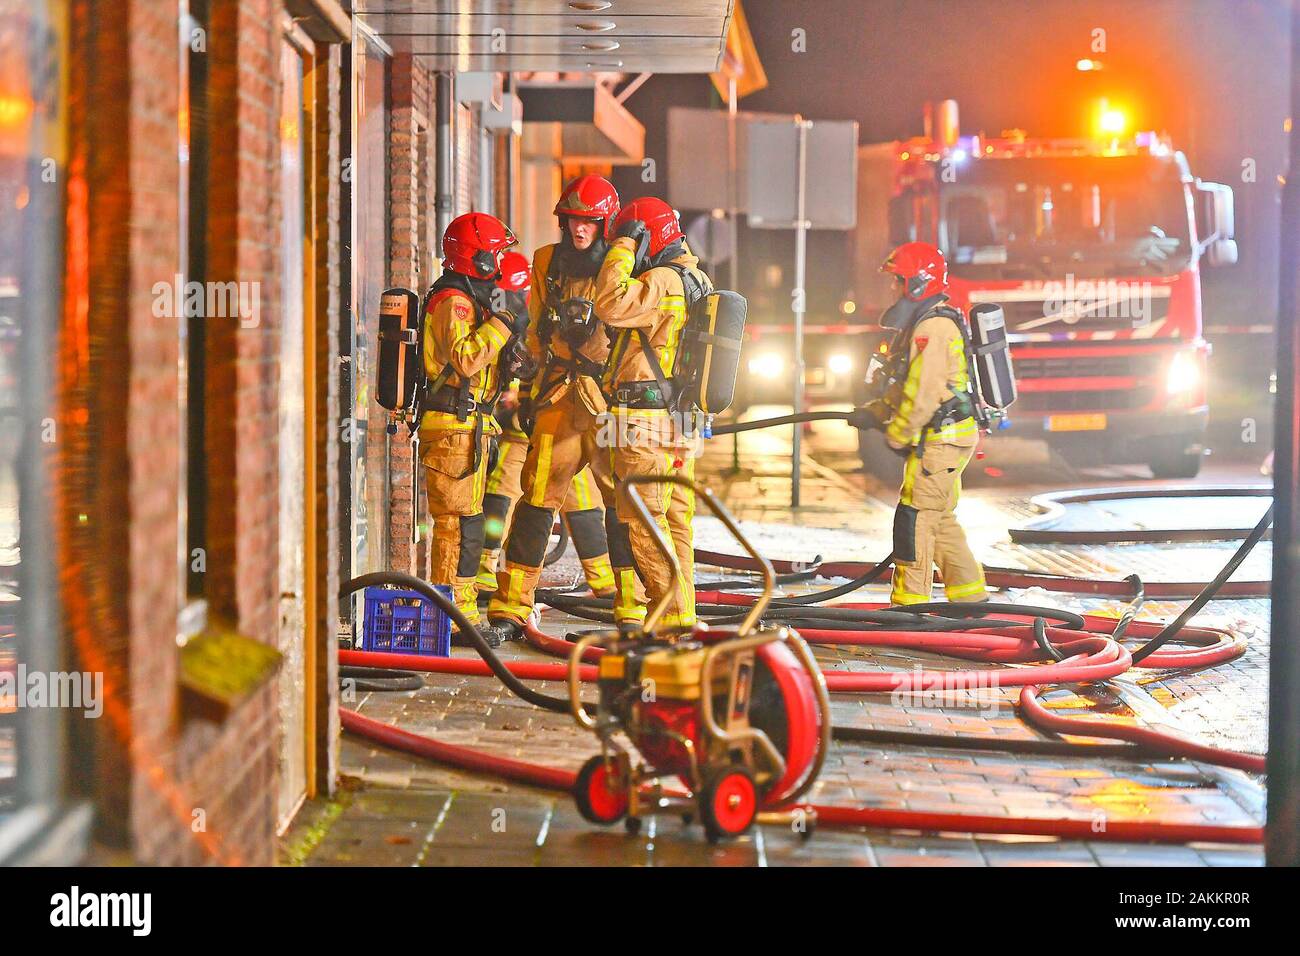 HEEZE, Netherlands. 09th Jan, 2020. dutchnews, Large fire in thrift store Heeze Credit: Pro Shots/Alamy Live News Stock Photo